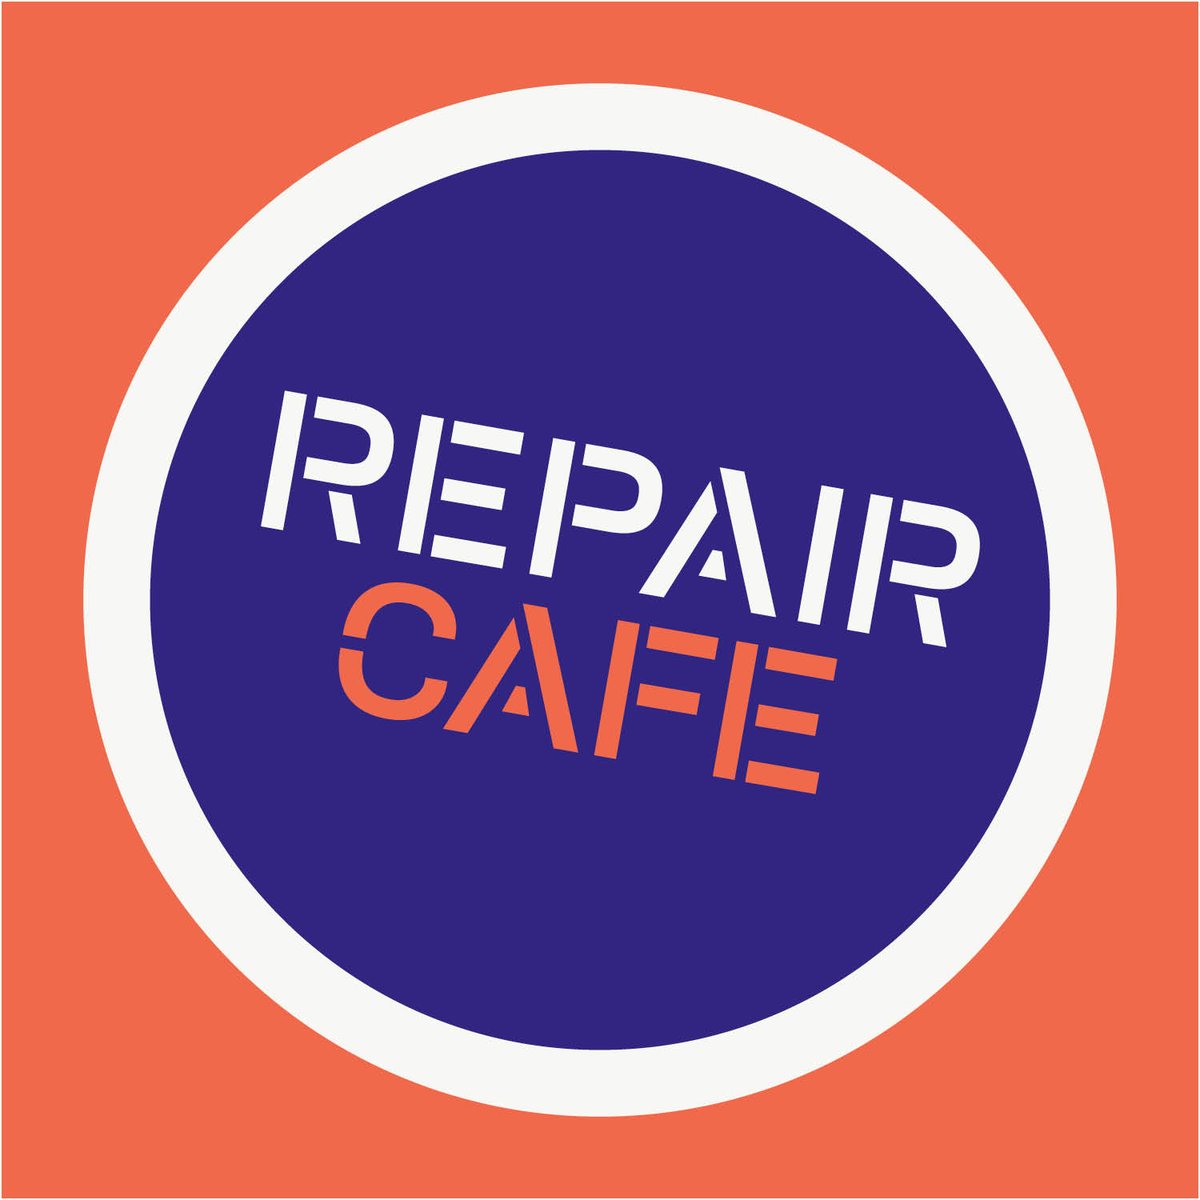 This London #RepairWeek we want to spread the word about the borough's AMAZING repair cafes. 

ruskinroadrepaircafe.org

suttonrepaircafe.co.uk

For a small donation you can get a range of items repaired at these volunteer-led initiatives. 

Please spread the word!!